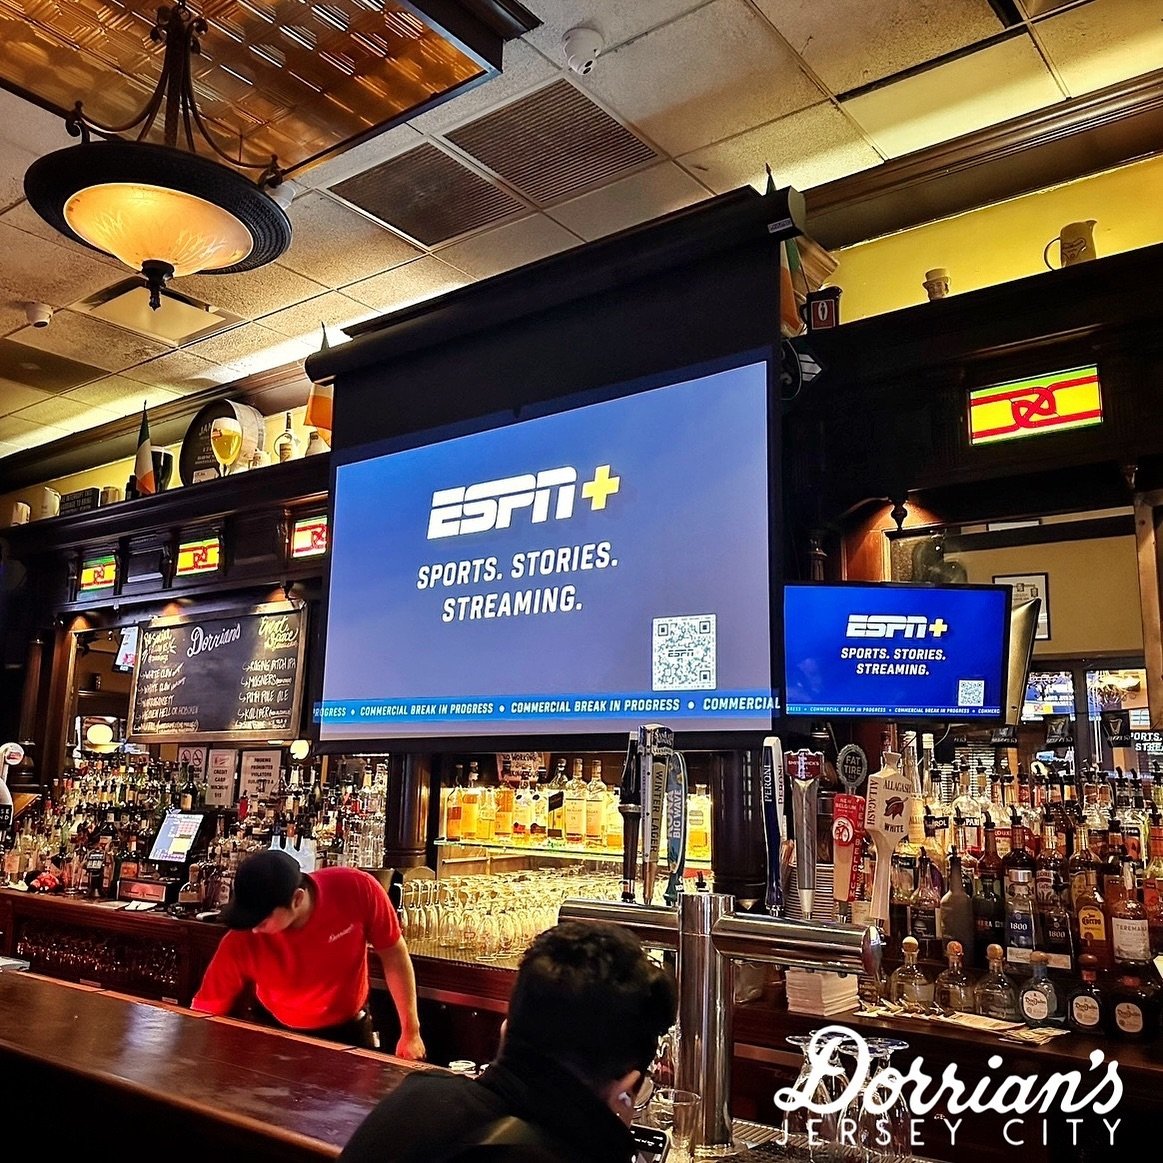 2 big screens and 18 televisions throughout the bar. Come by to catch all your favorite games this week.